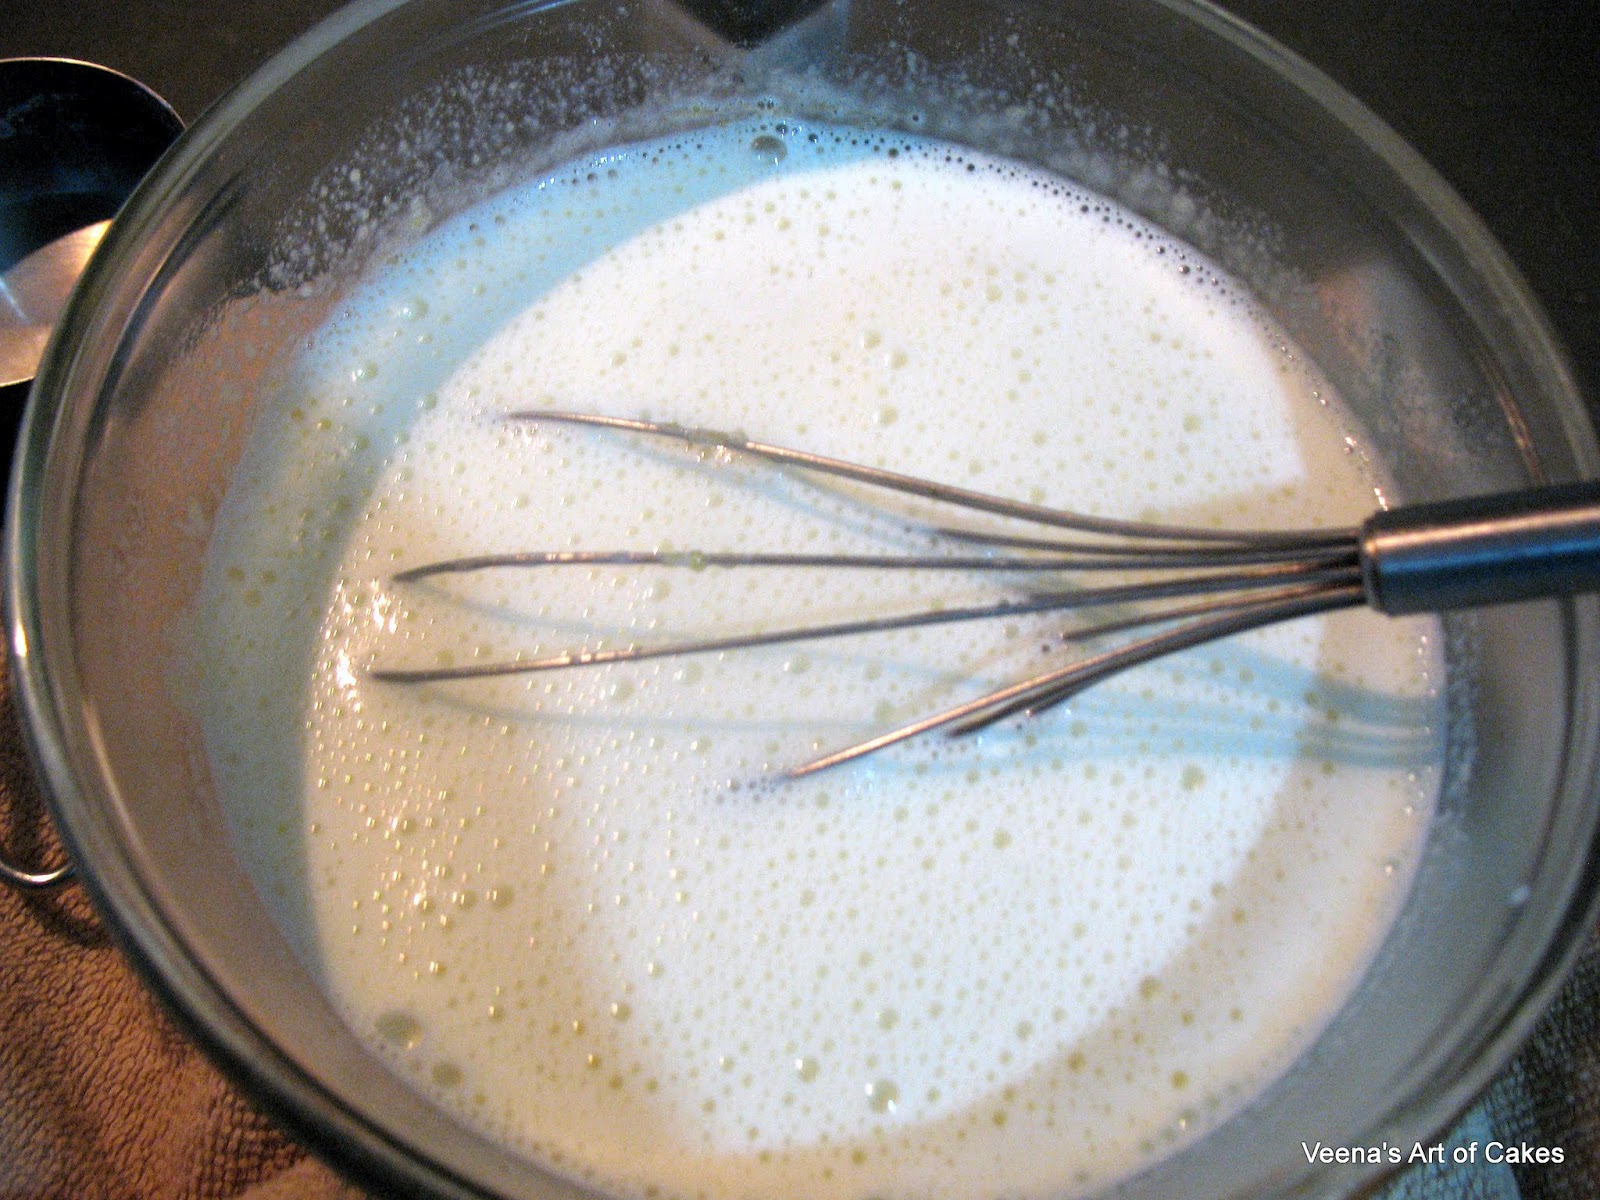 Now pour it back into the same pan. Note the amount of bubbles in the ...